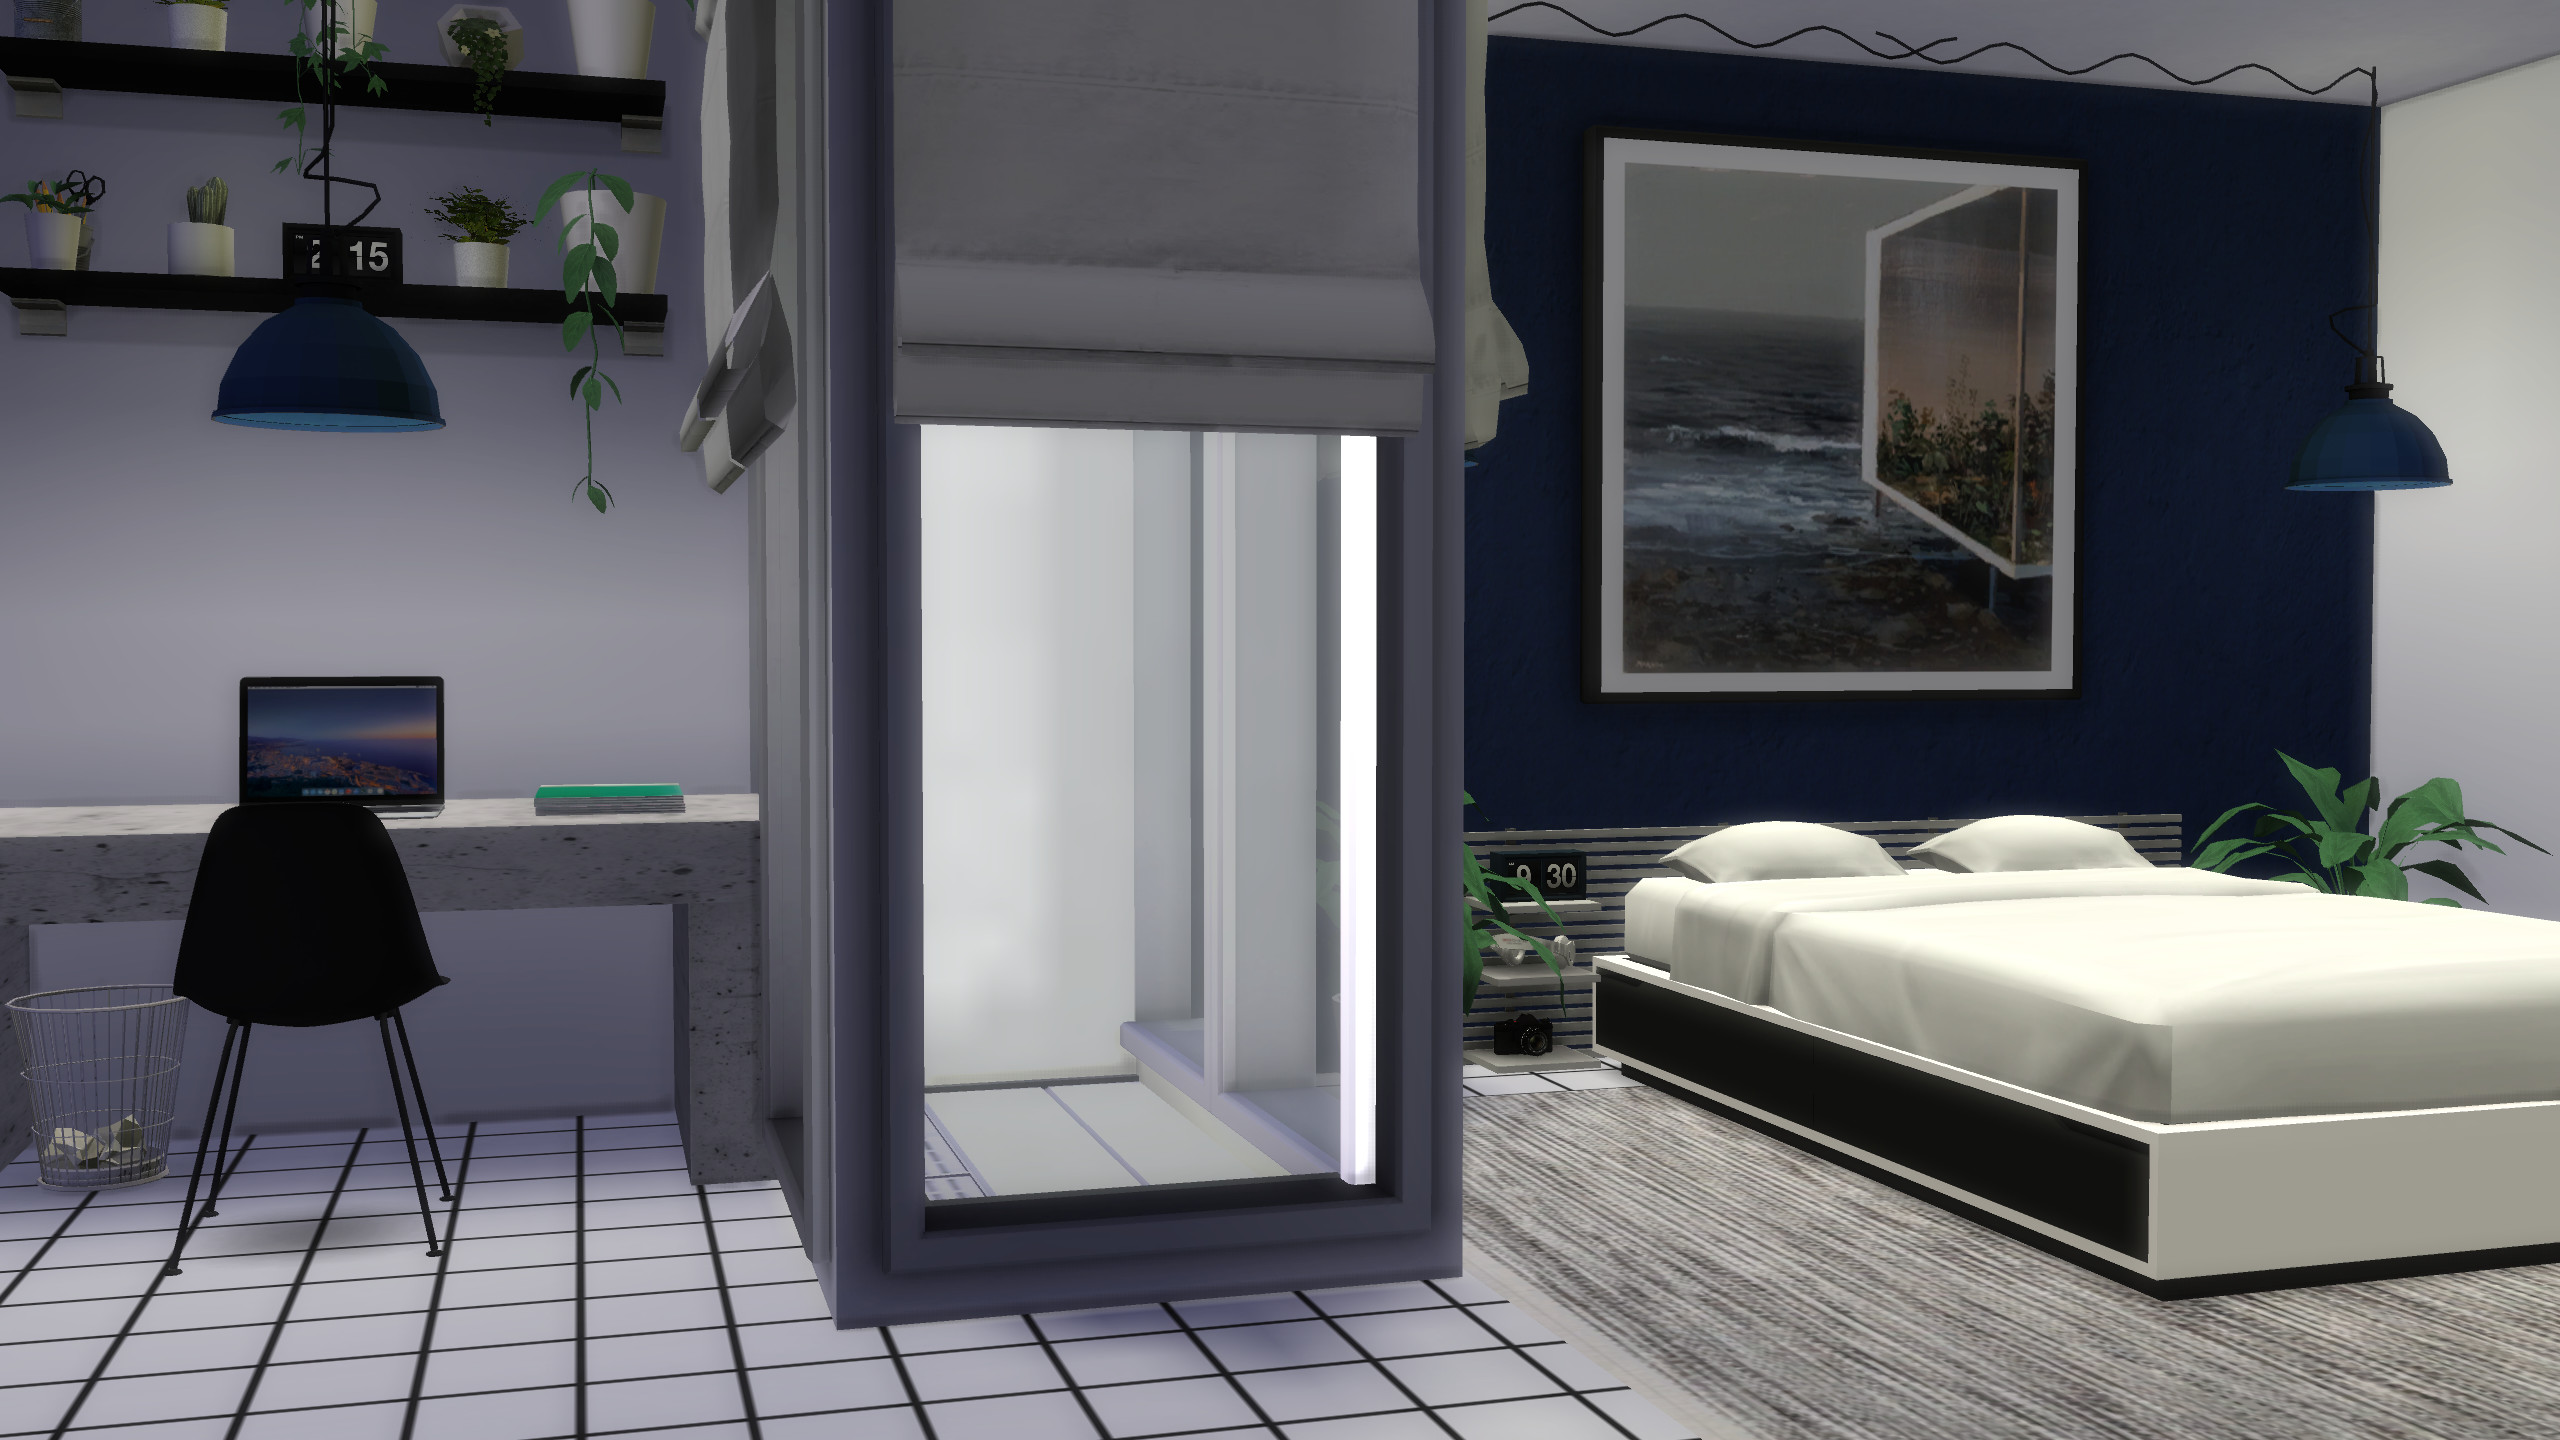 2560x1440 Sims 4Letting natural light into a basement bedroom (i.redd.it)